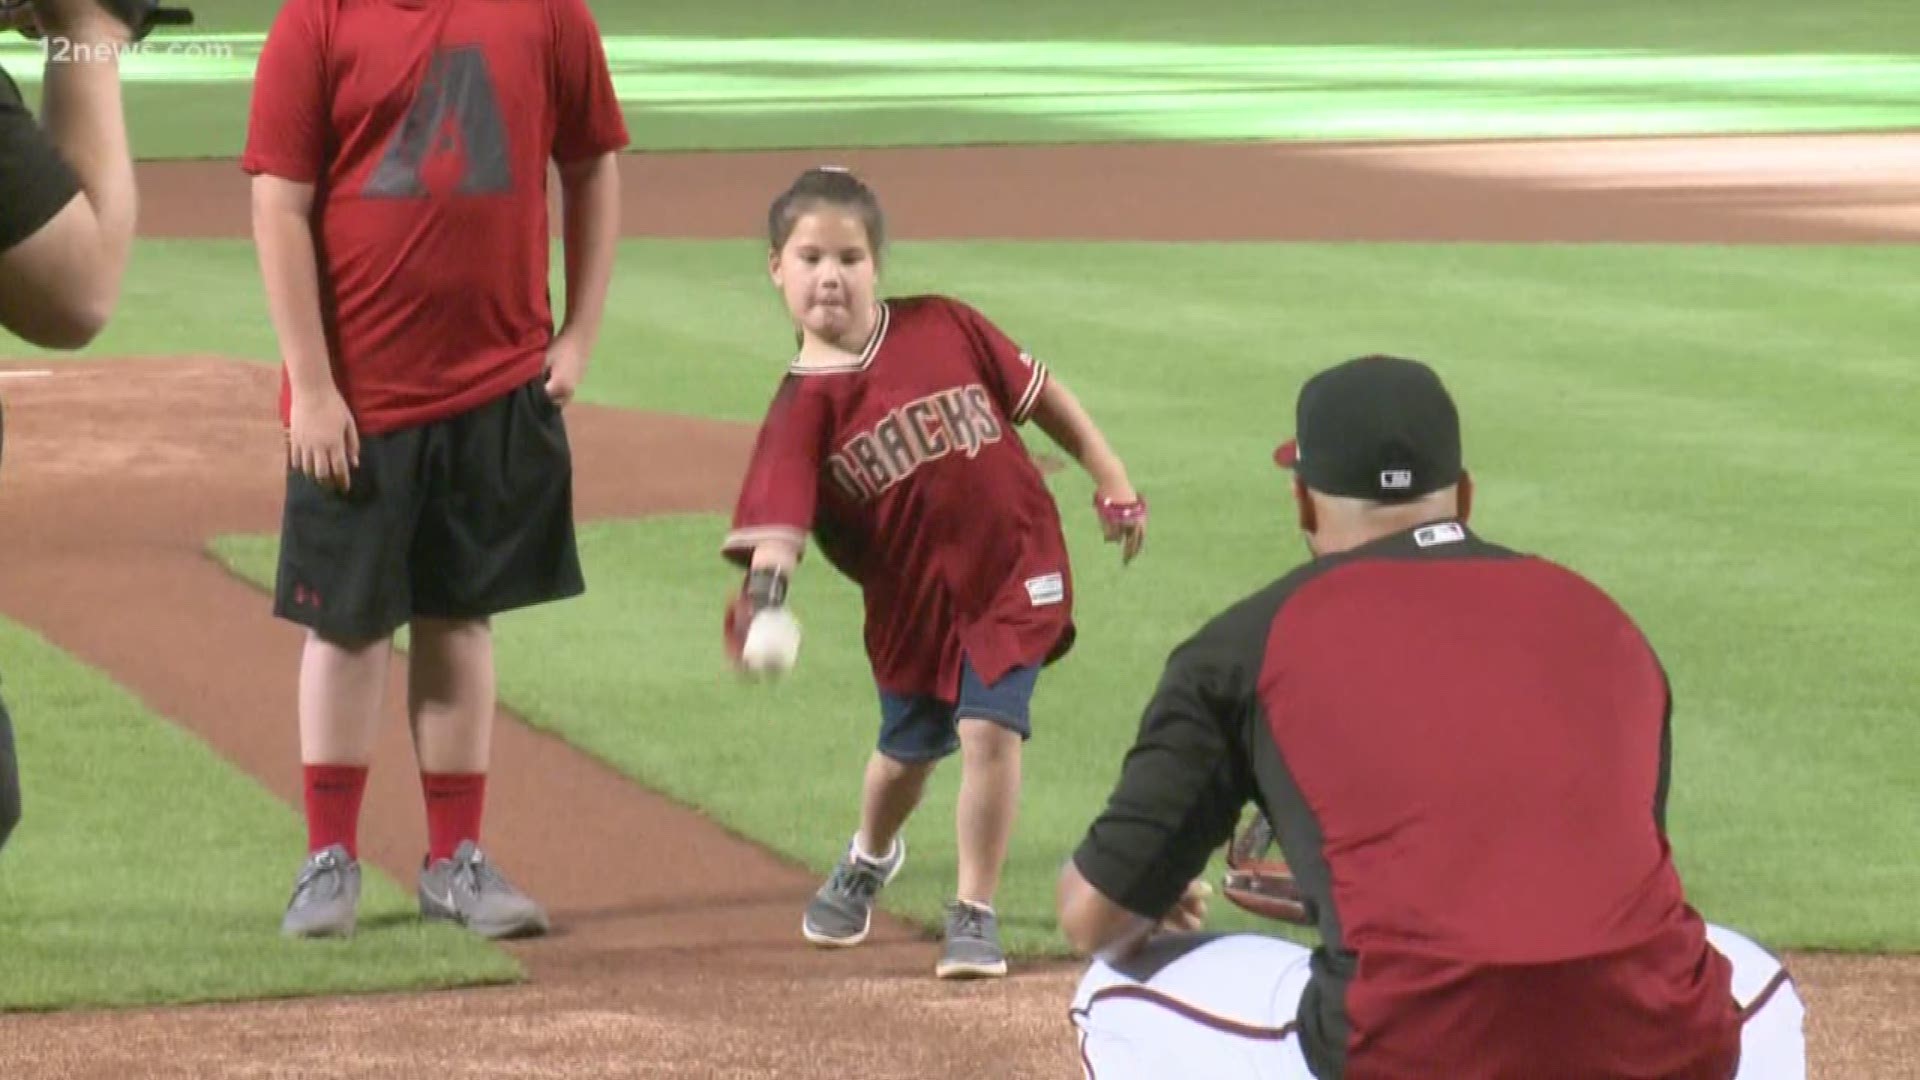 She's on a mission to throw the first pitch in all 30 major league ballparks.